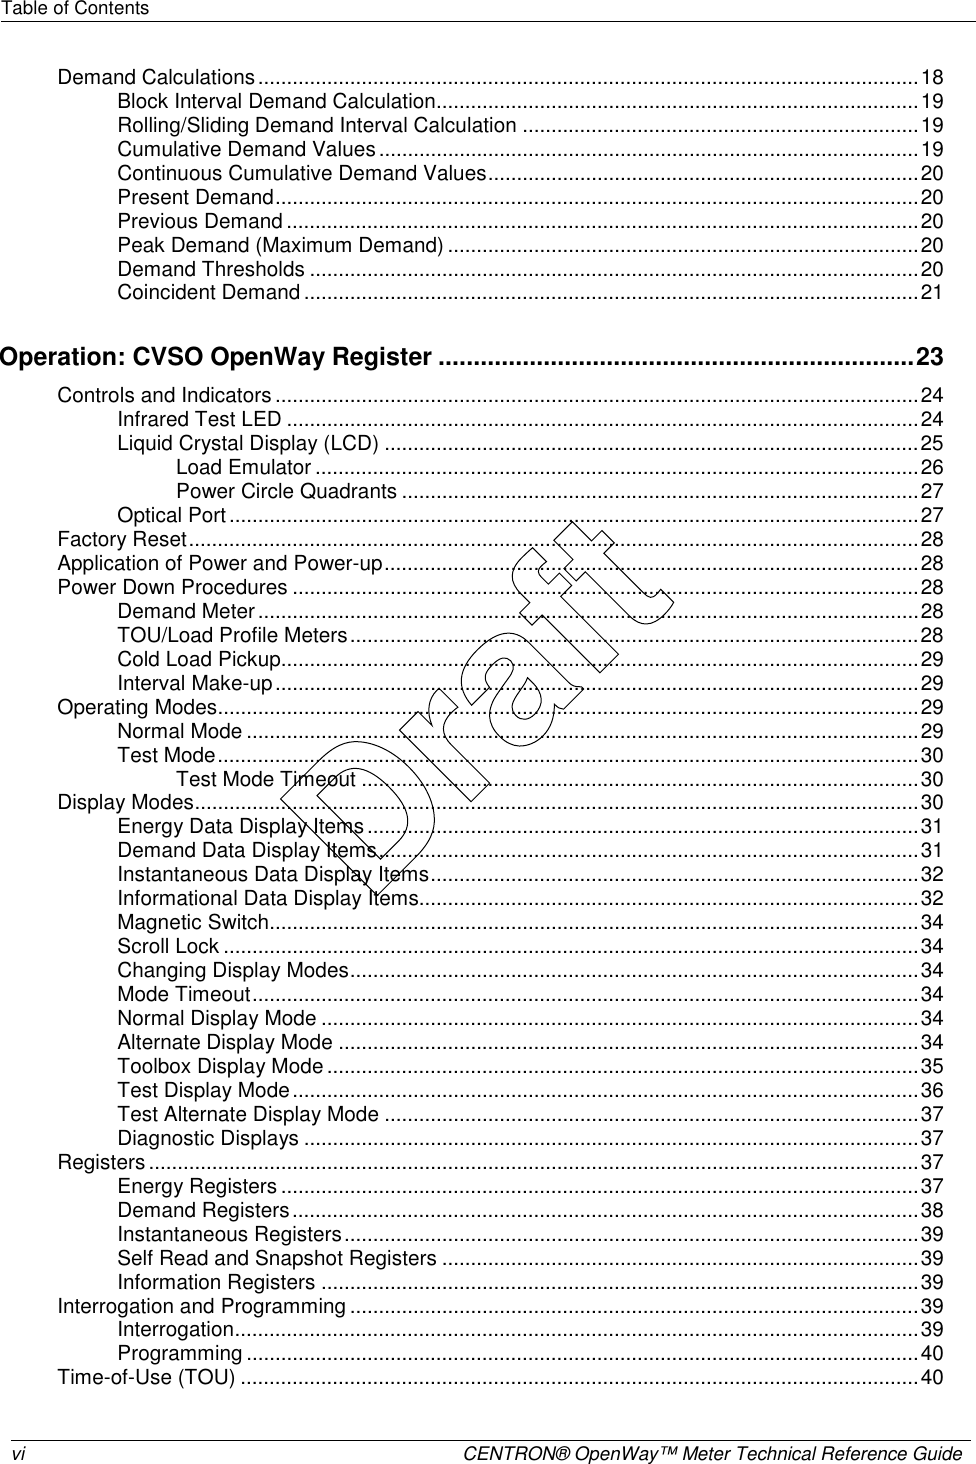 Table of Contents   vi  CENTRON® OpenWay™ Meter Technical Reference Guide   Demand Calculations...................................................................................................................18 Block Interval Demand Calculation....................................................................................19 Rolling/Sliding Demand Interval Calculation .....................................................................19 Cumulative Demand Values..............................................................................................19 Continuous Cumulative Demand Values...........................................................................20 Present Demand................................................................................................................20 Previous Demand ..............................................................................................................20 Peak Demand (Maximum Demand) ..................................................................................20 Demand Thresholds ..........................................................................................................20 Coincident Demand ...........................................................................................................21 Operation: CVSO OpenWay Register ....................................................................23 Controls and Indicators ................................................................................................................24 Infrared Test LED ..............................................................................................................24 Liquid Crystal Display (LCD) .............................................................................................25 Load Emulator .........................................................................................................26 Power Circle Quadrants ..........................................................................................27 Optical Port ........................................................................................................................27 Factory Reset...............................................................................................................................28 Application of Power and Power-up.............................................................................................28 Power Down Procedures .............................................................................................................28 Demand Meter ...................................................................................................................28 TOU/Load Profile Meters...................................................................................................28 Cold Load Pickup...............................................................................................................29 Interval Make-up................................................................................................................29 Operating Modes..........................................................................................................................29 Normal Mode .....................................................................................................................29 Test Mode..........................................................................................................................30 Test Mode Timeout .................................................................................................30 Display Modes..............................................................................................................................30 Energy Data Display Items ................................................................................................31 Demand Data Display Items..............................................................................................31 Instantaneous Data Display Items.....................................................................................32 Informational Data Display Items.......................................................................................32 Magnetic Switch.................................................................................................................34 Scroll Lock .........................................................................................................................34 Changing Display Modes...................................................................................................34 Mode Timeout....................................................................................................................34 Normal Display Mode ........................................................................................................34 Alternate Display Mode .....................................................................................................34 Toolbox Display Mode .......................................................................................................35 Test Display Mode.............................................................................................................36 Test Alternate Display Mode .............................................................................................37 Diagnostic Displays ...........................................................................................................37 Registers ......................................................................................................................................37 Energy Registers ...............................................................................................................37 Demand Registers.............................................................................................................38 Instantaneous Registers....................................................................................................39 Self Read and Snapshot Registers ...................................................................................39 Information Registers ........................................................................................................39 Interrogation and Programming ...................................................................................................39 Interrogation.......................................................................................................................39 Programming .....................................................................................................................40 Time-of-Use (TOU) ......................................................................................................................40 Draft